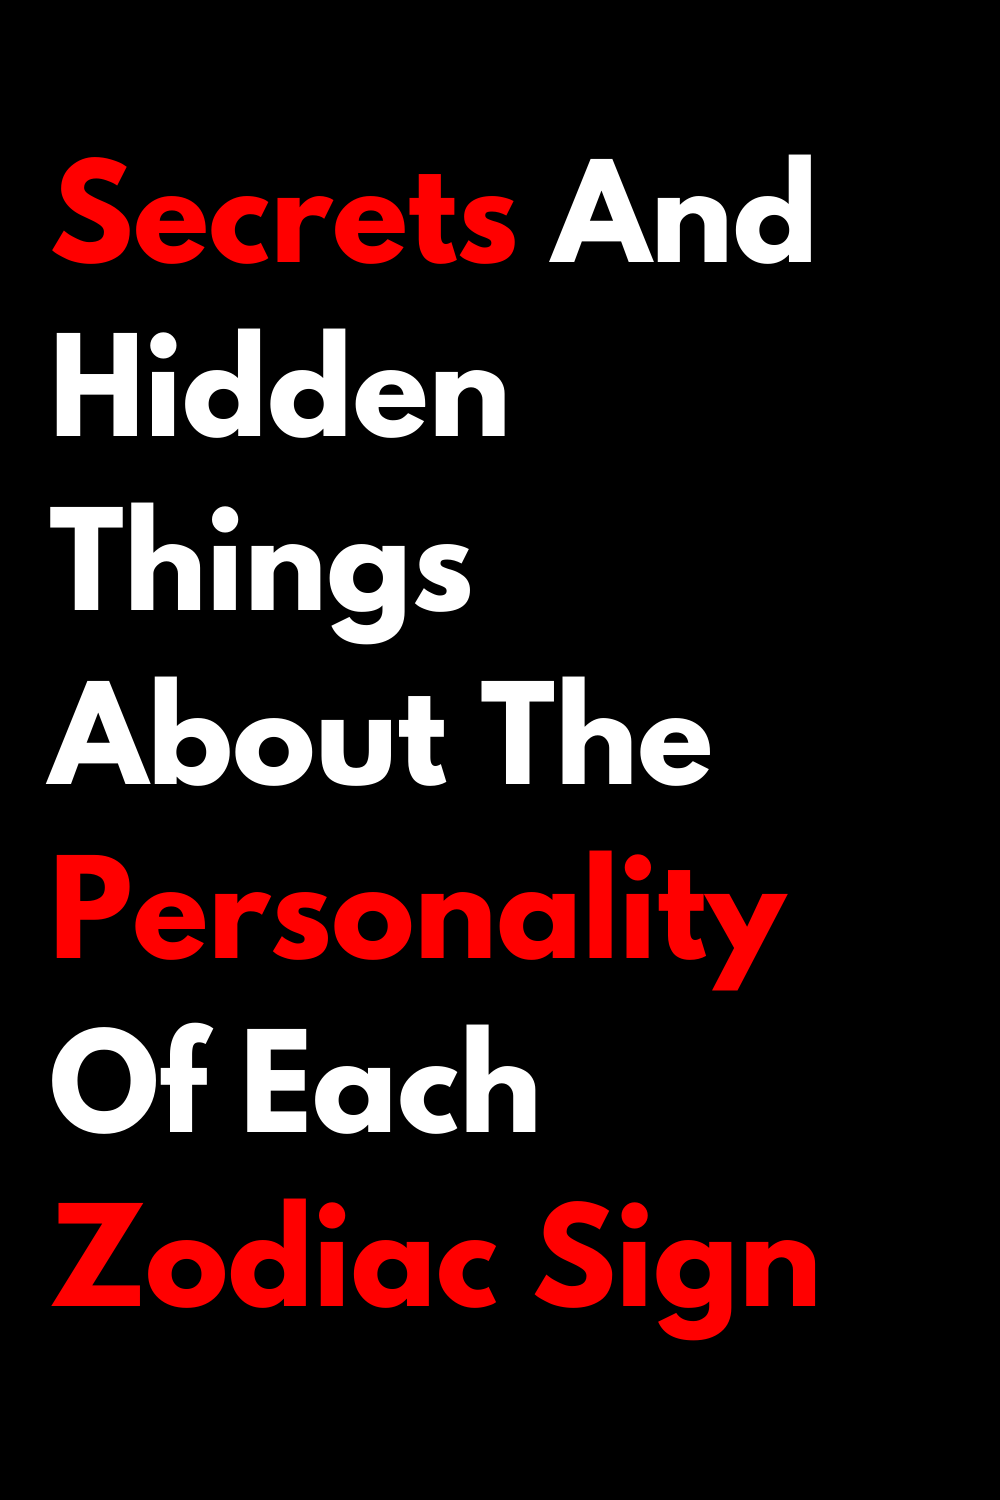 Secrets And Hidden Things About The Personality Of Each Zodiac Sign